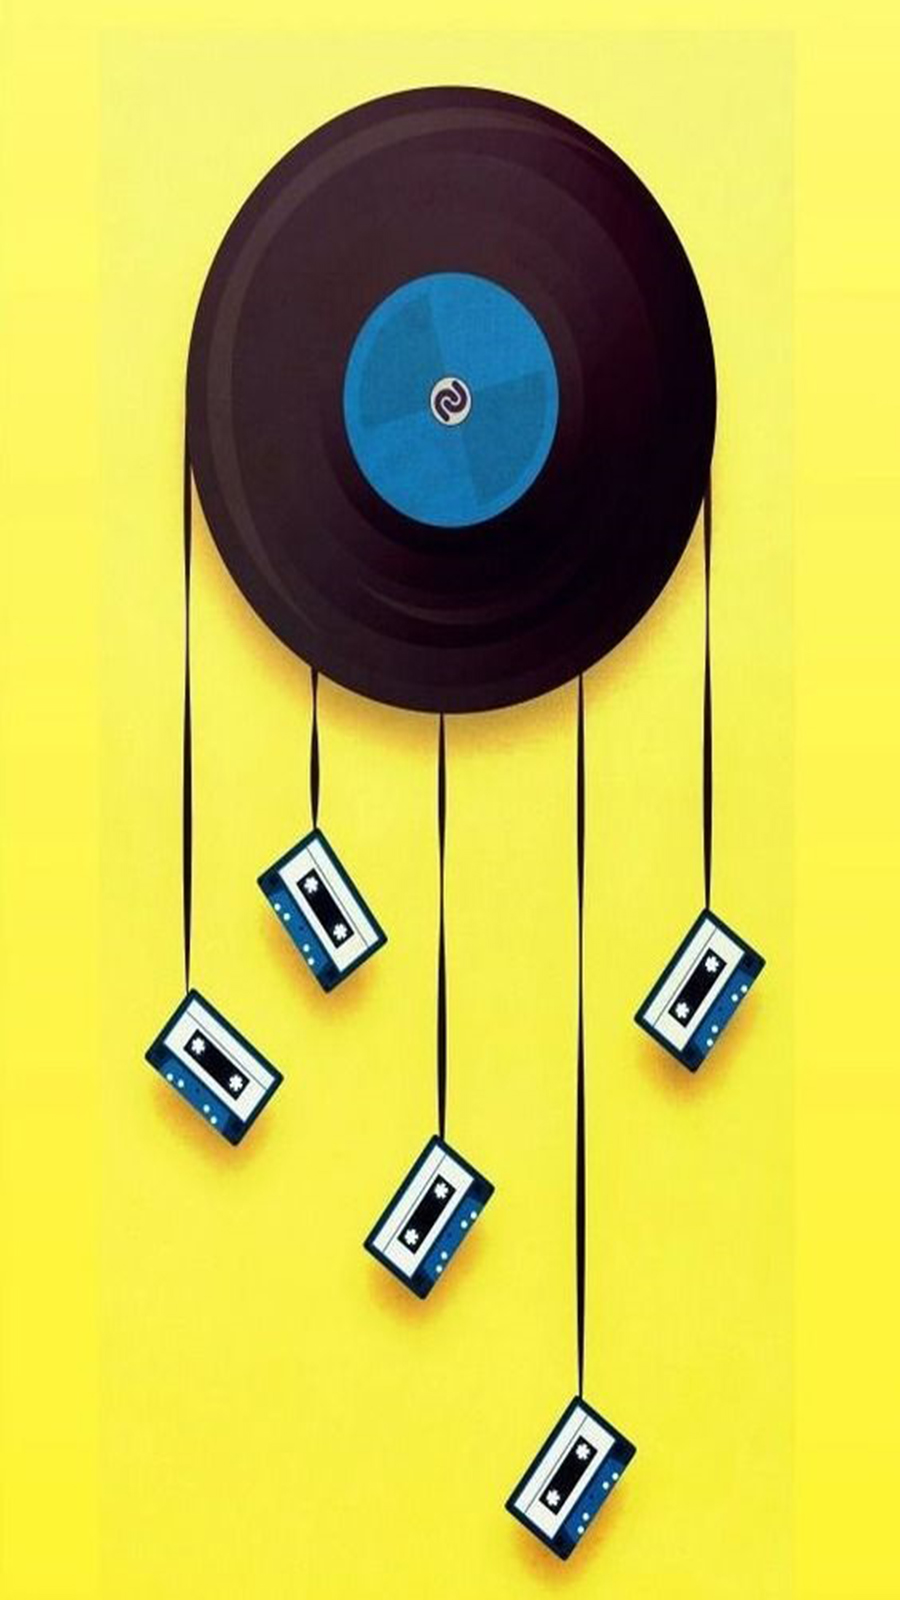 Music & Record Wallpapers Free Download